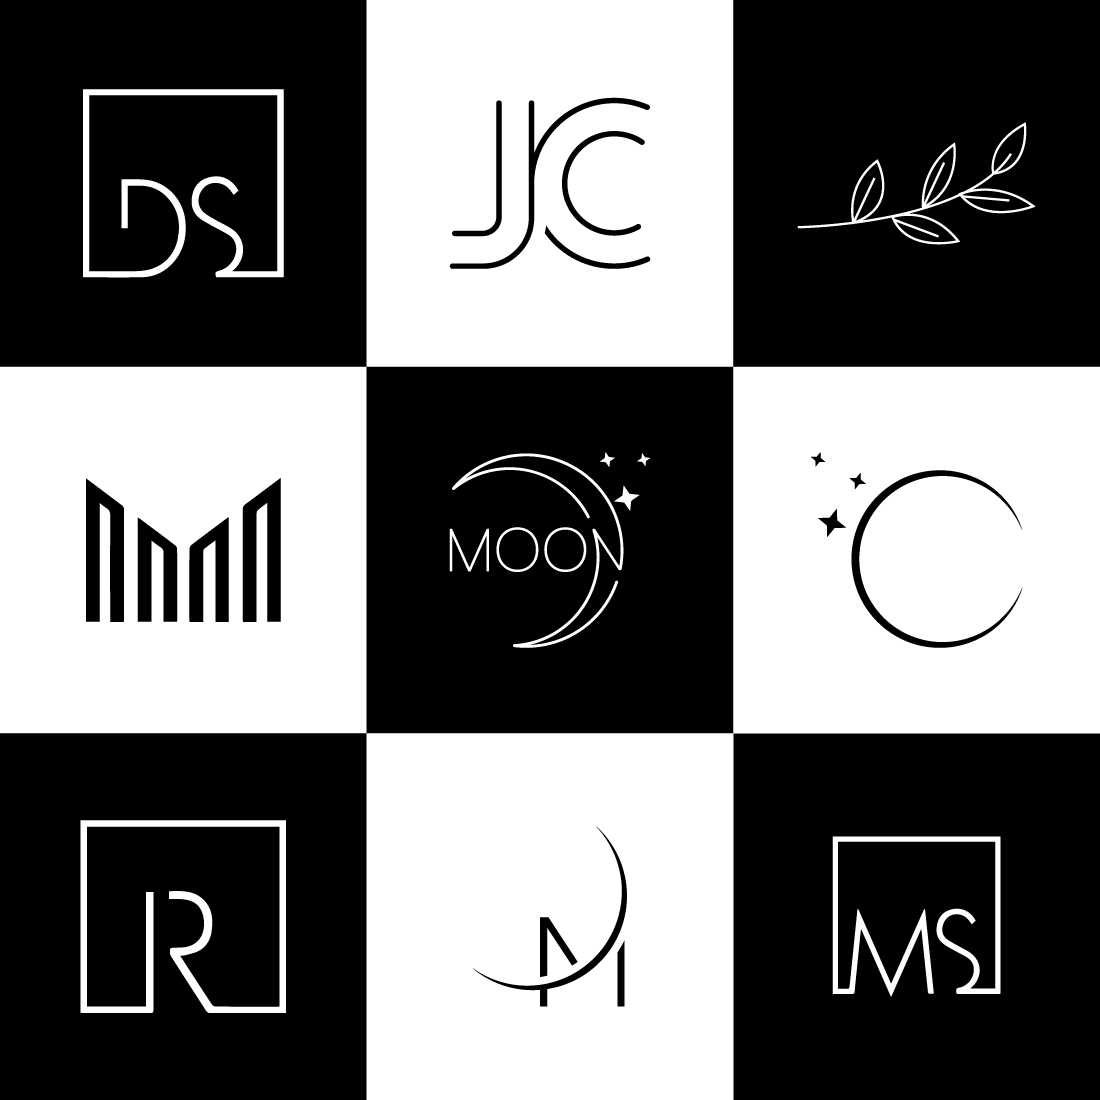 A selection of images with beautiful luxury logos in white.